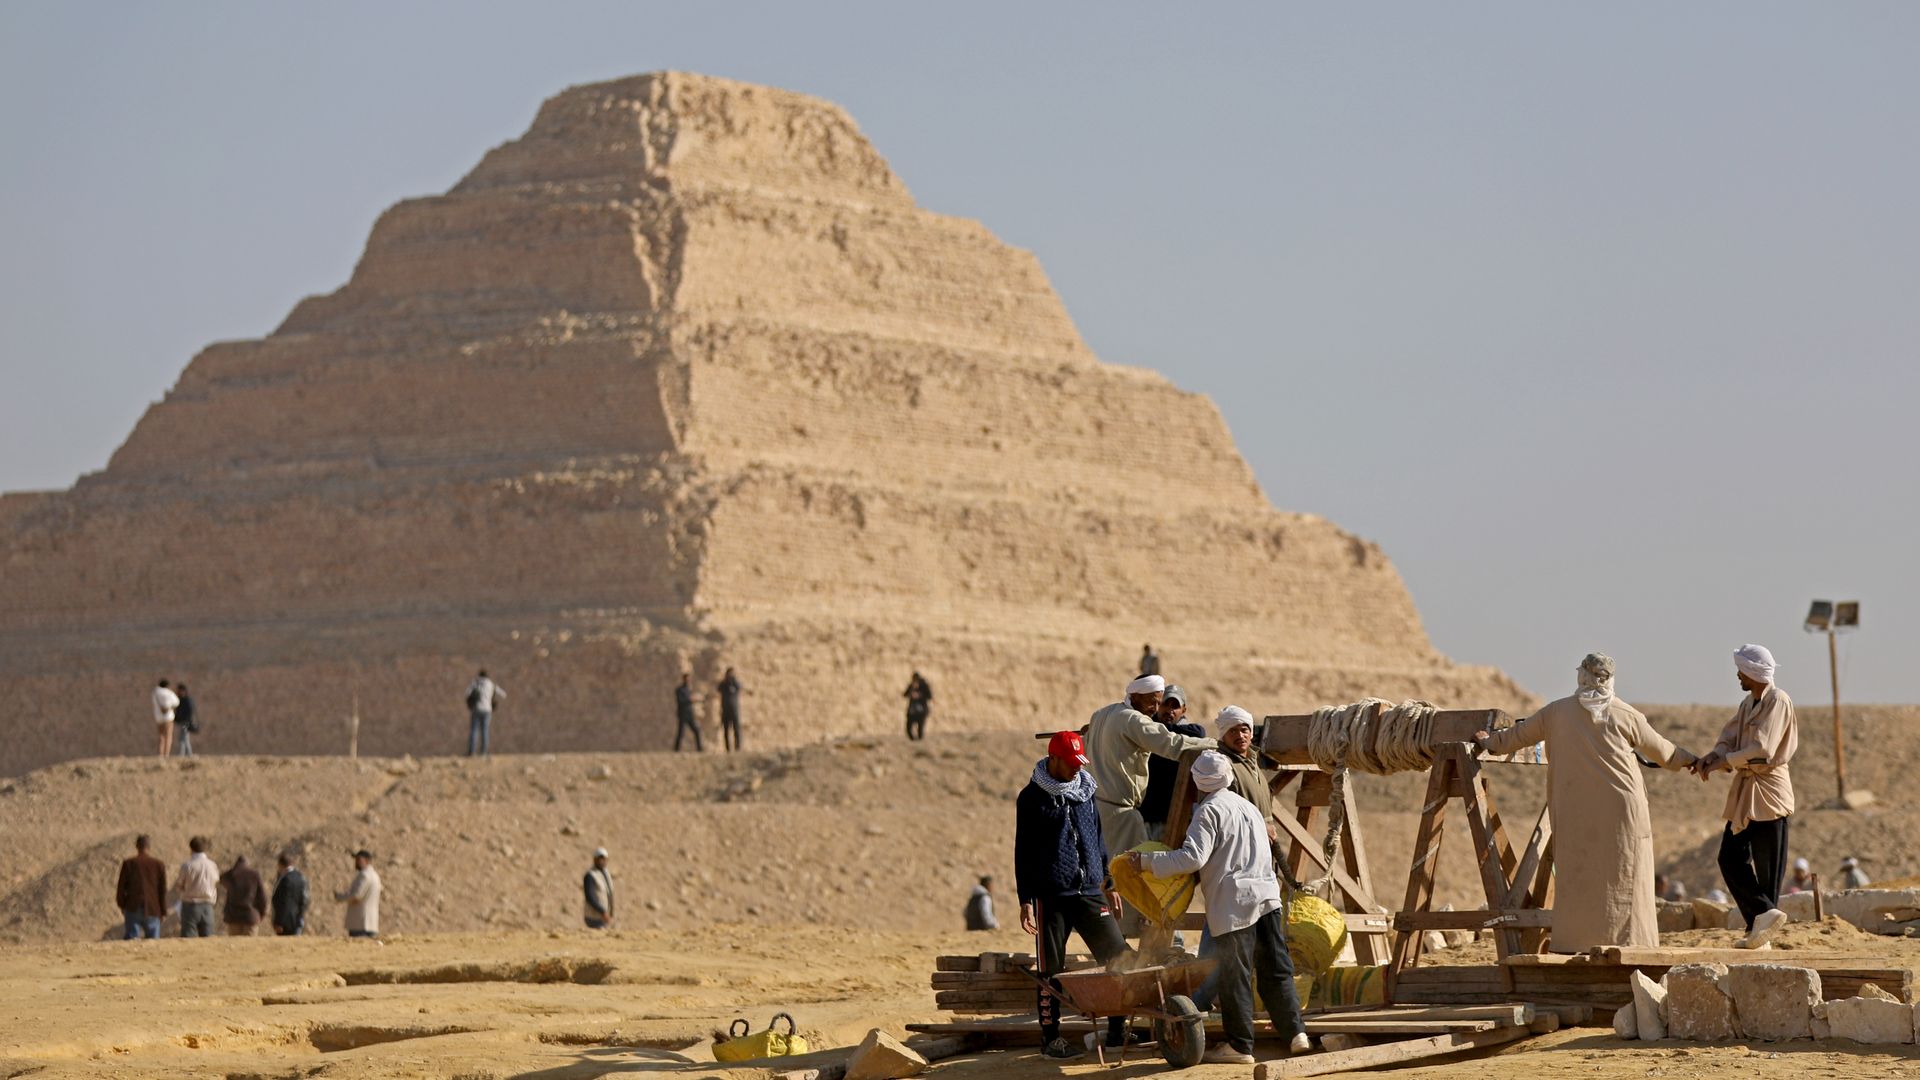 Egyptian archaeological workers excavating the site of the Step Pyramid of Djoser in Saqqara 